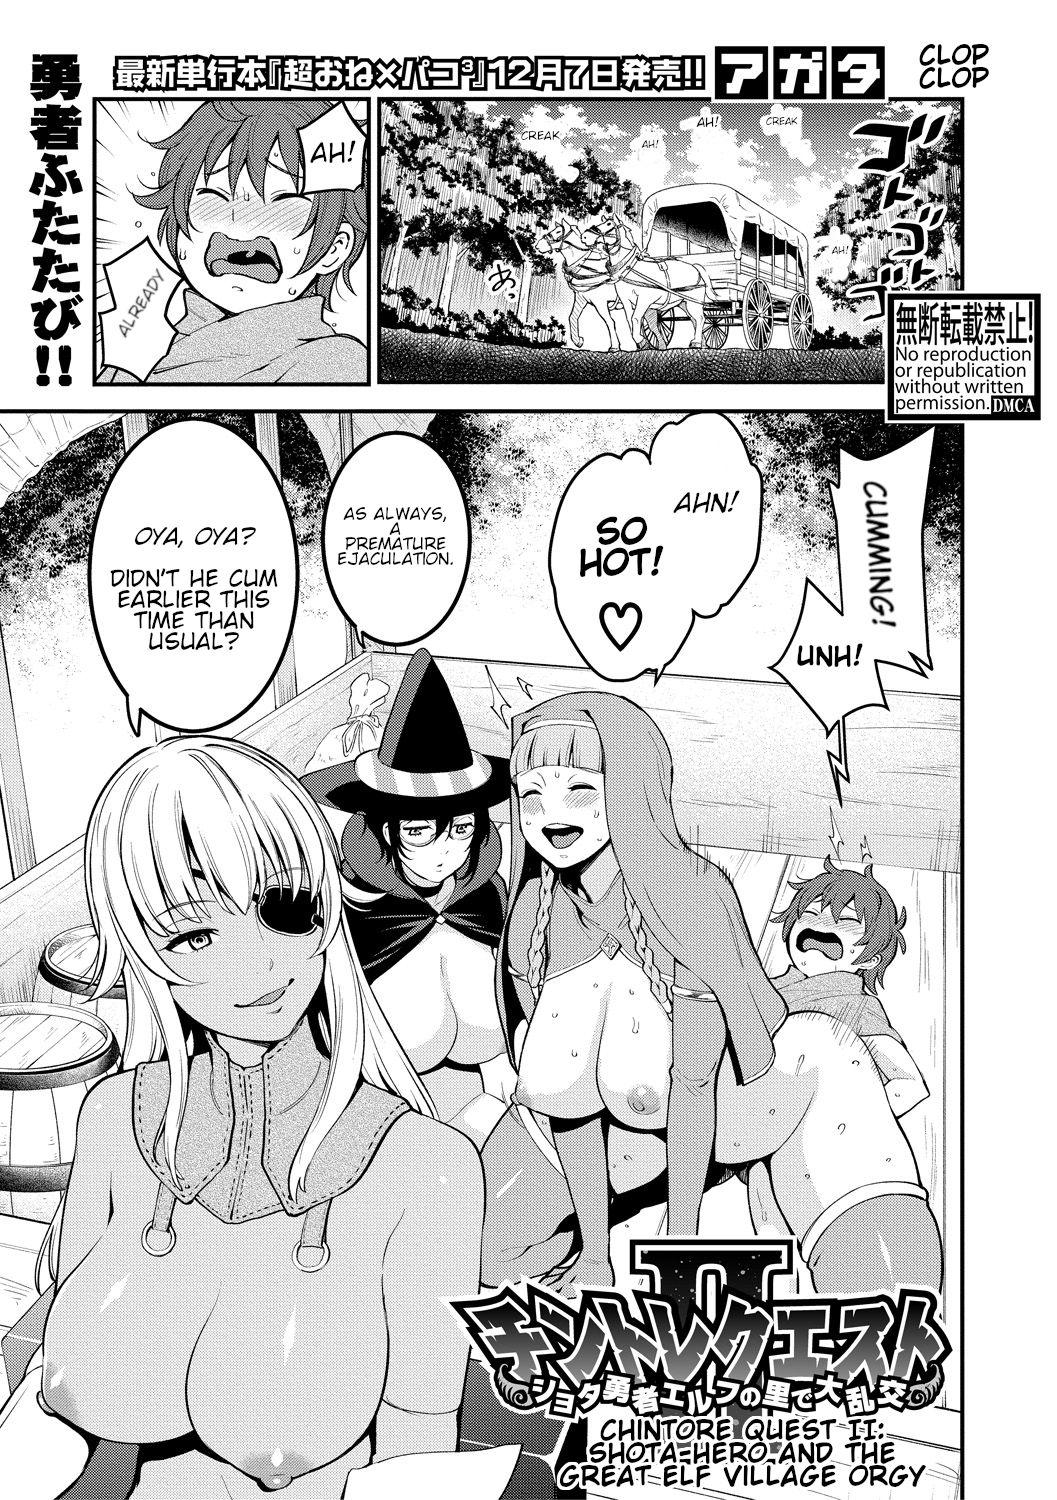 Chacal Chintore Quest II: Shota Yuusha Elf no Sato de Dai Rankou | Chintore Quest II: Shota Hero and the Great Elf Village Orgy Whooty - Picture 1